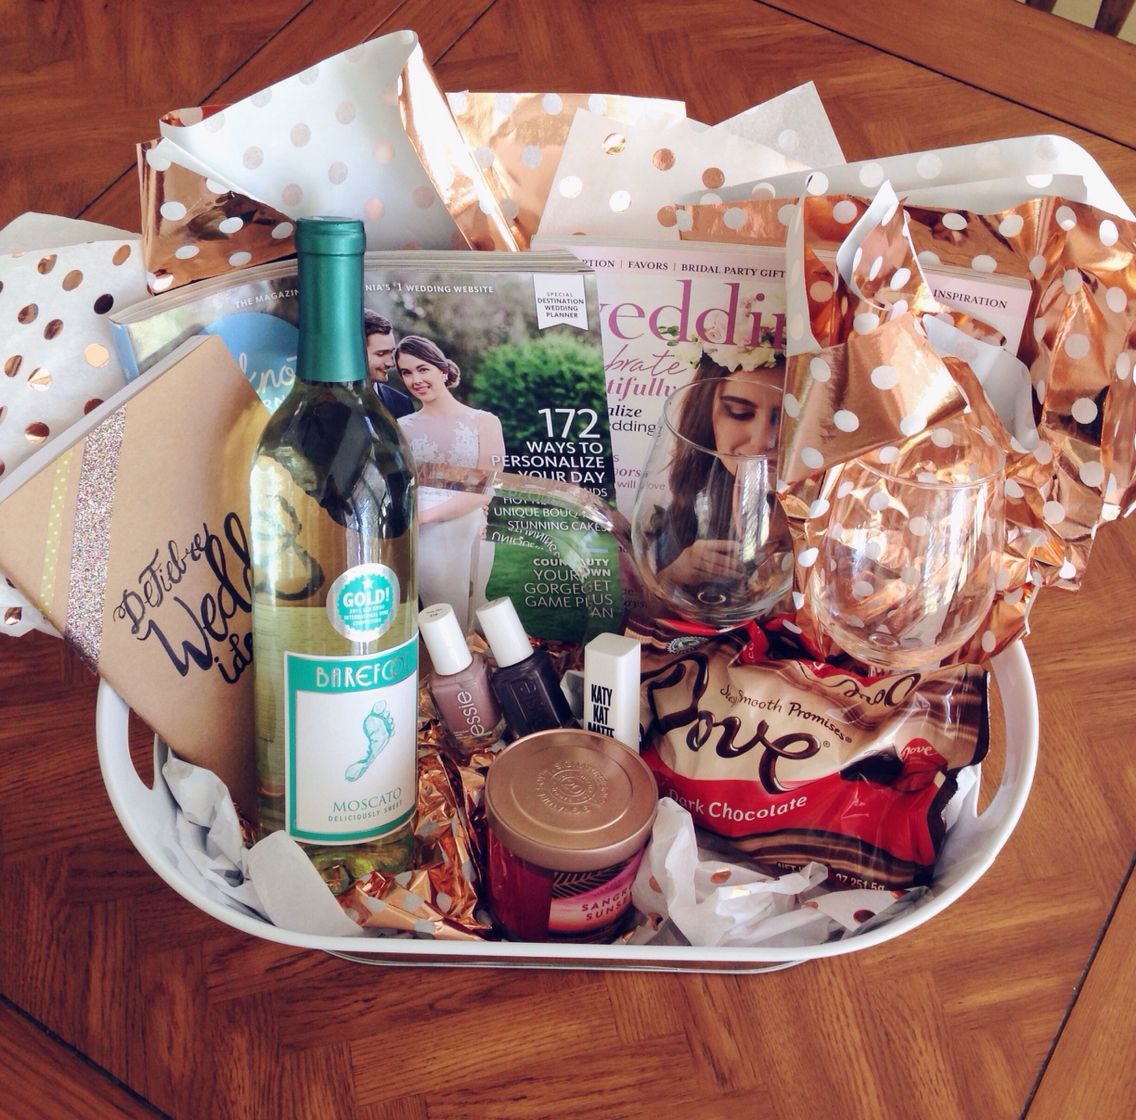 Good Ideas For Engagement Party Gifts
 Engagement Gift Basket Survival Kit Everything your